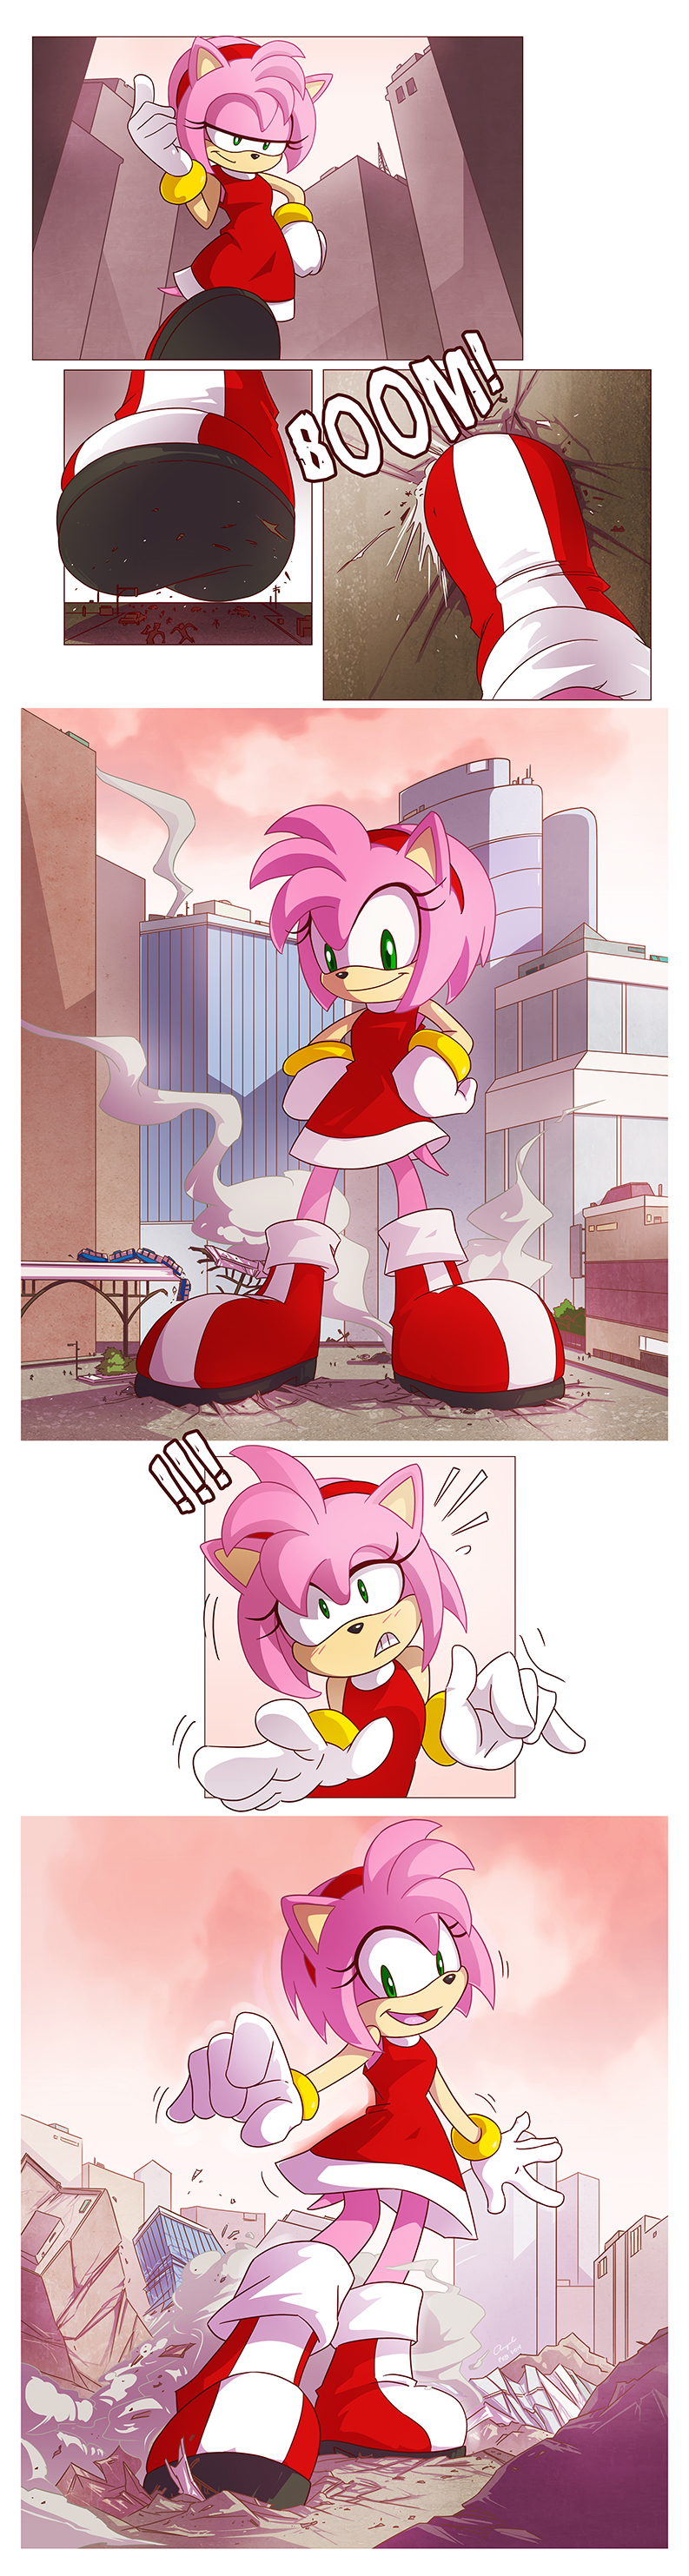 Amy Rose Grows.